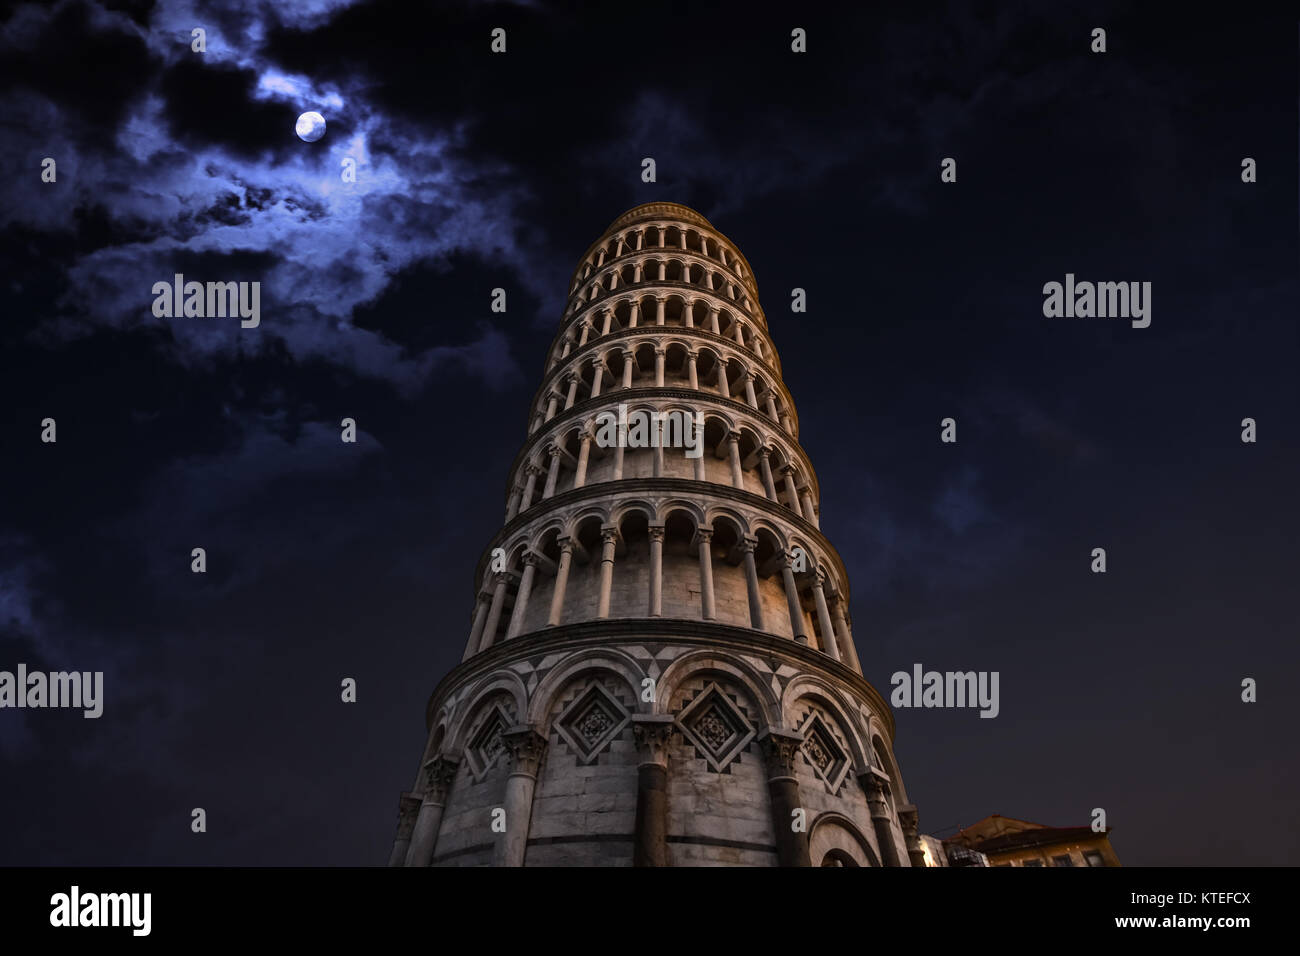 Leaning Tower Pisa Night Stock Photos Leaning Tower Pisa